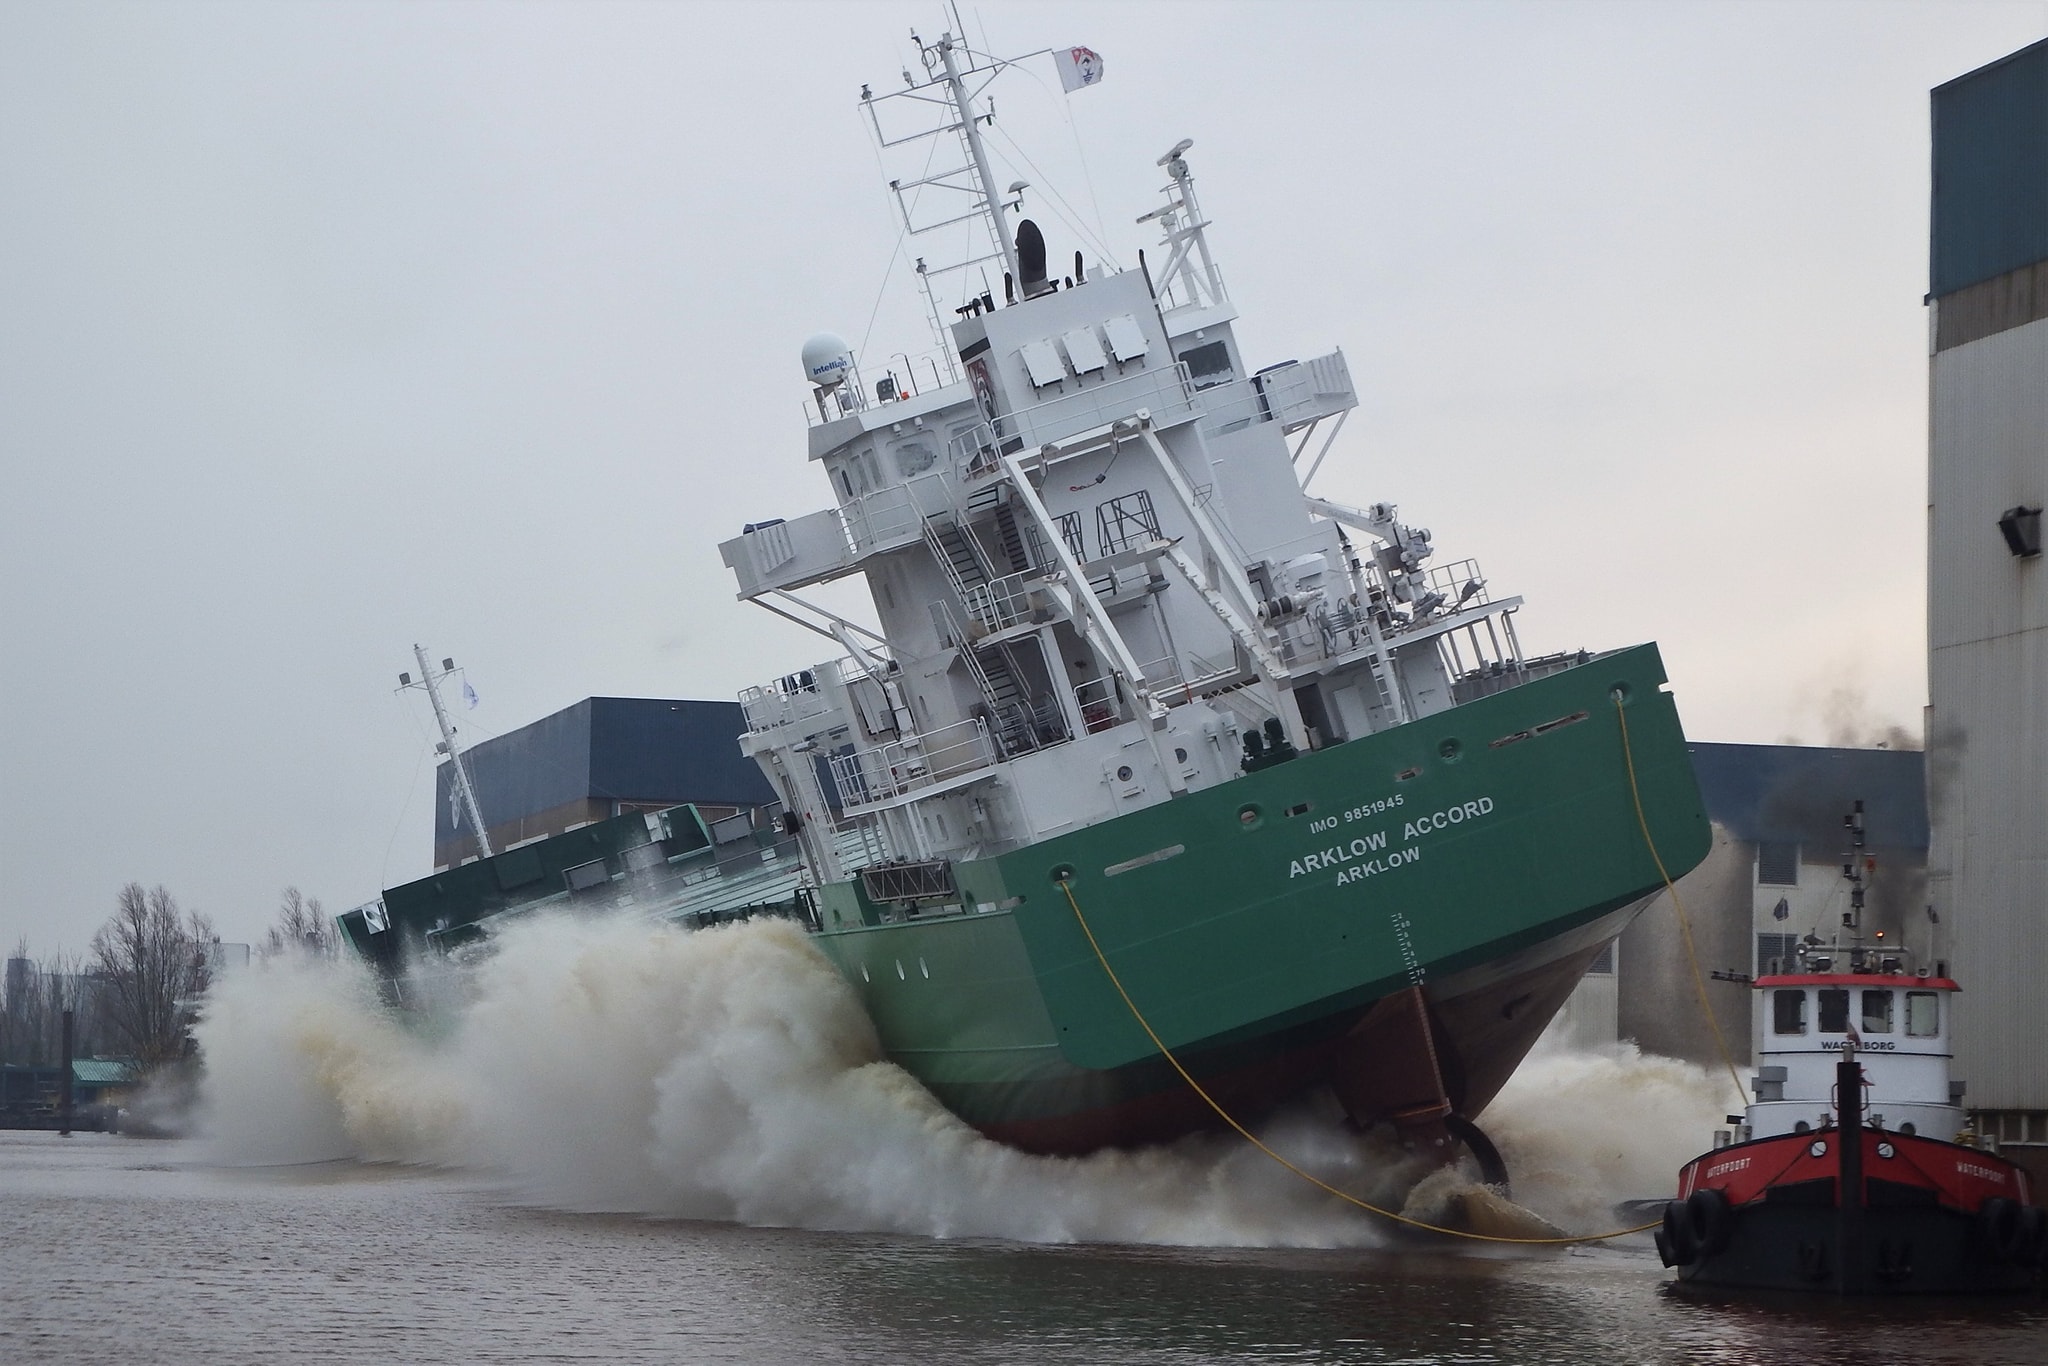 Ferus Smit Nb. 438 Arklow Accord successfully launched (Video)